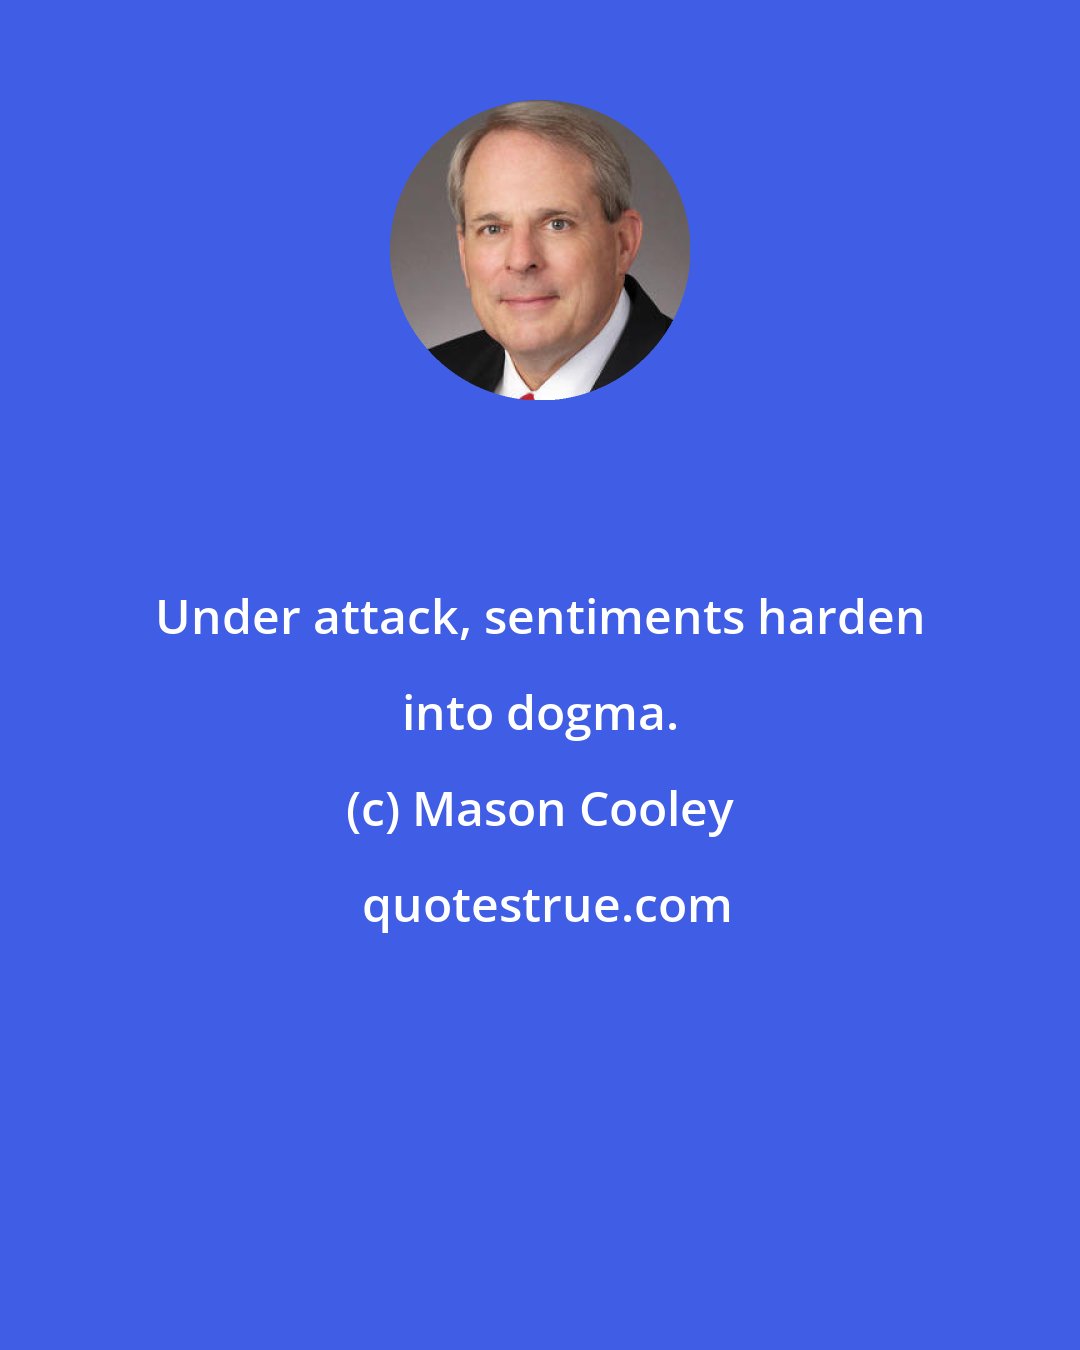 Mason Cooley: Under attack, sentiments harden into dogma.